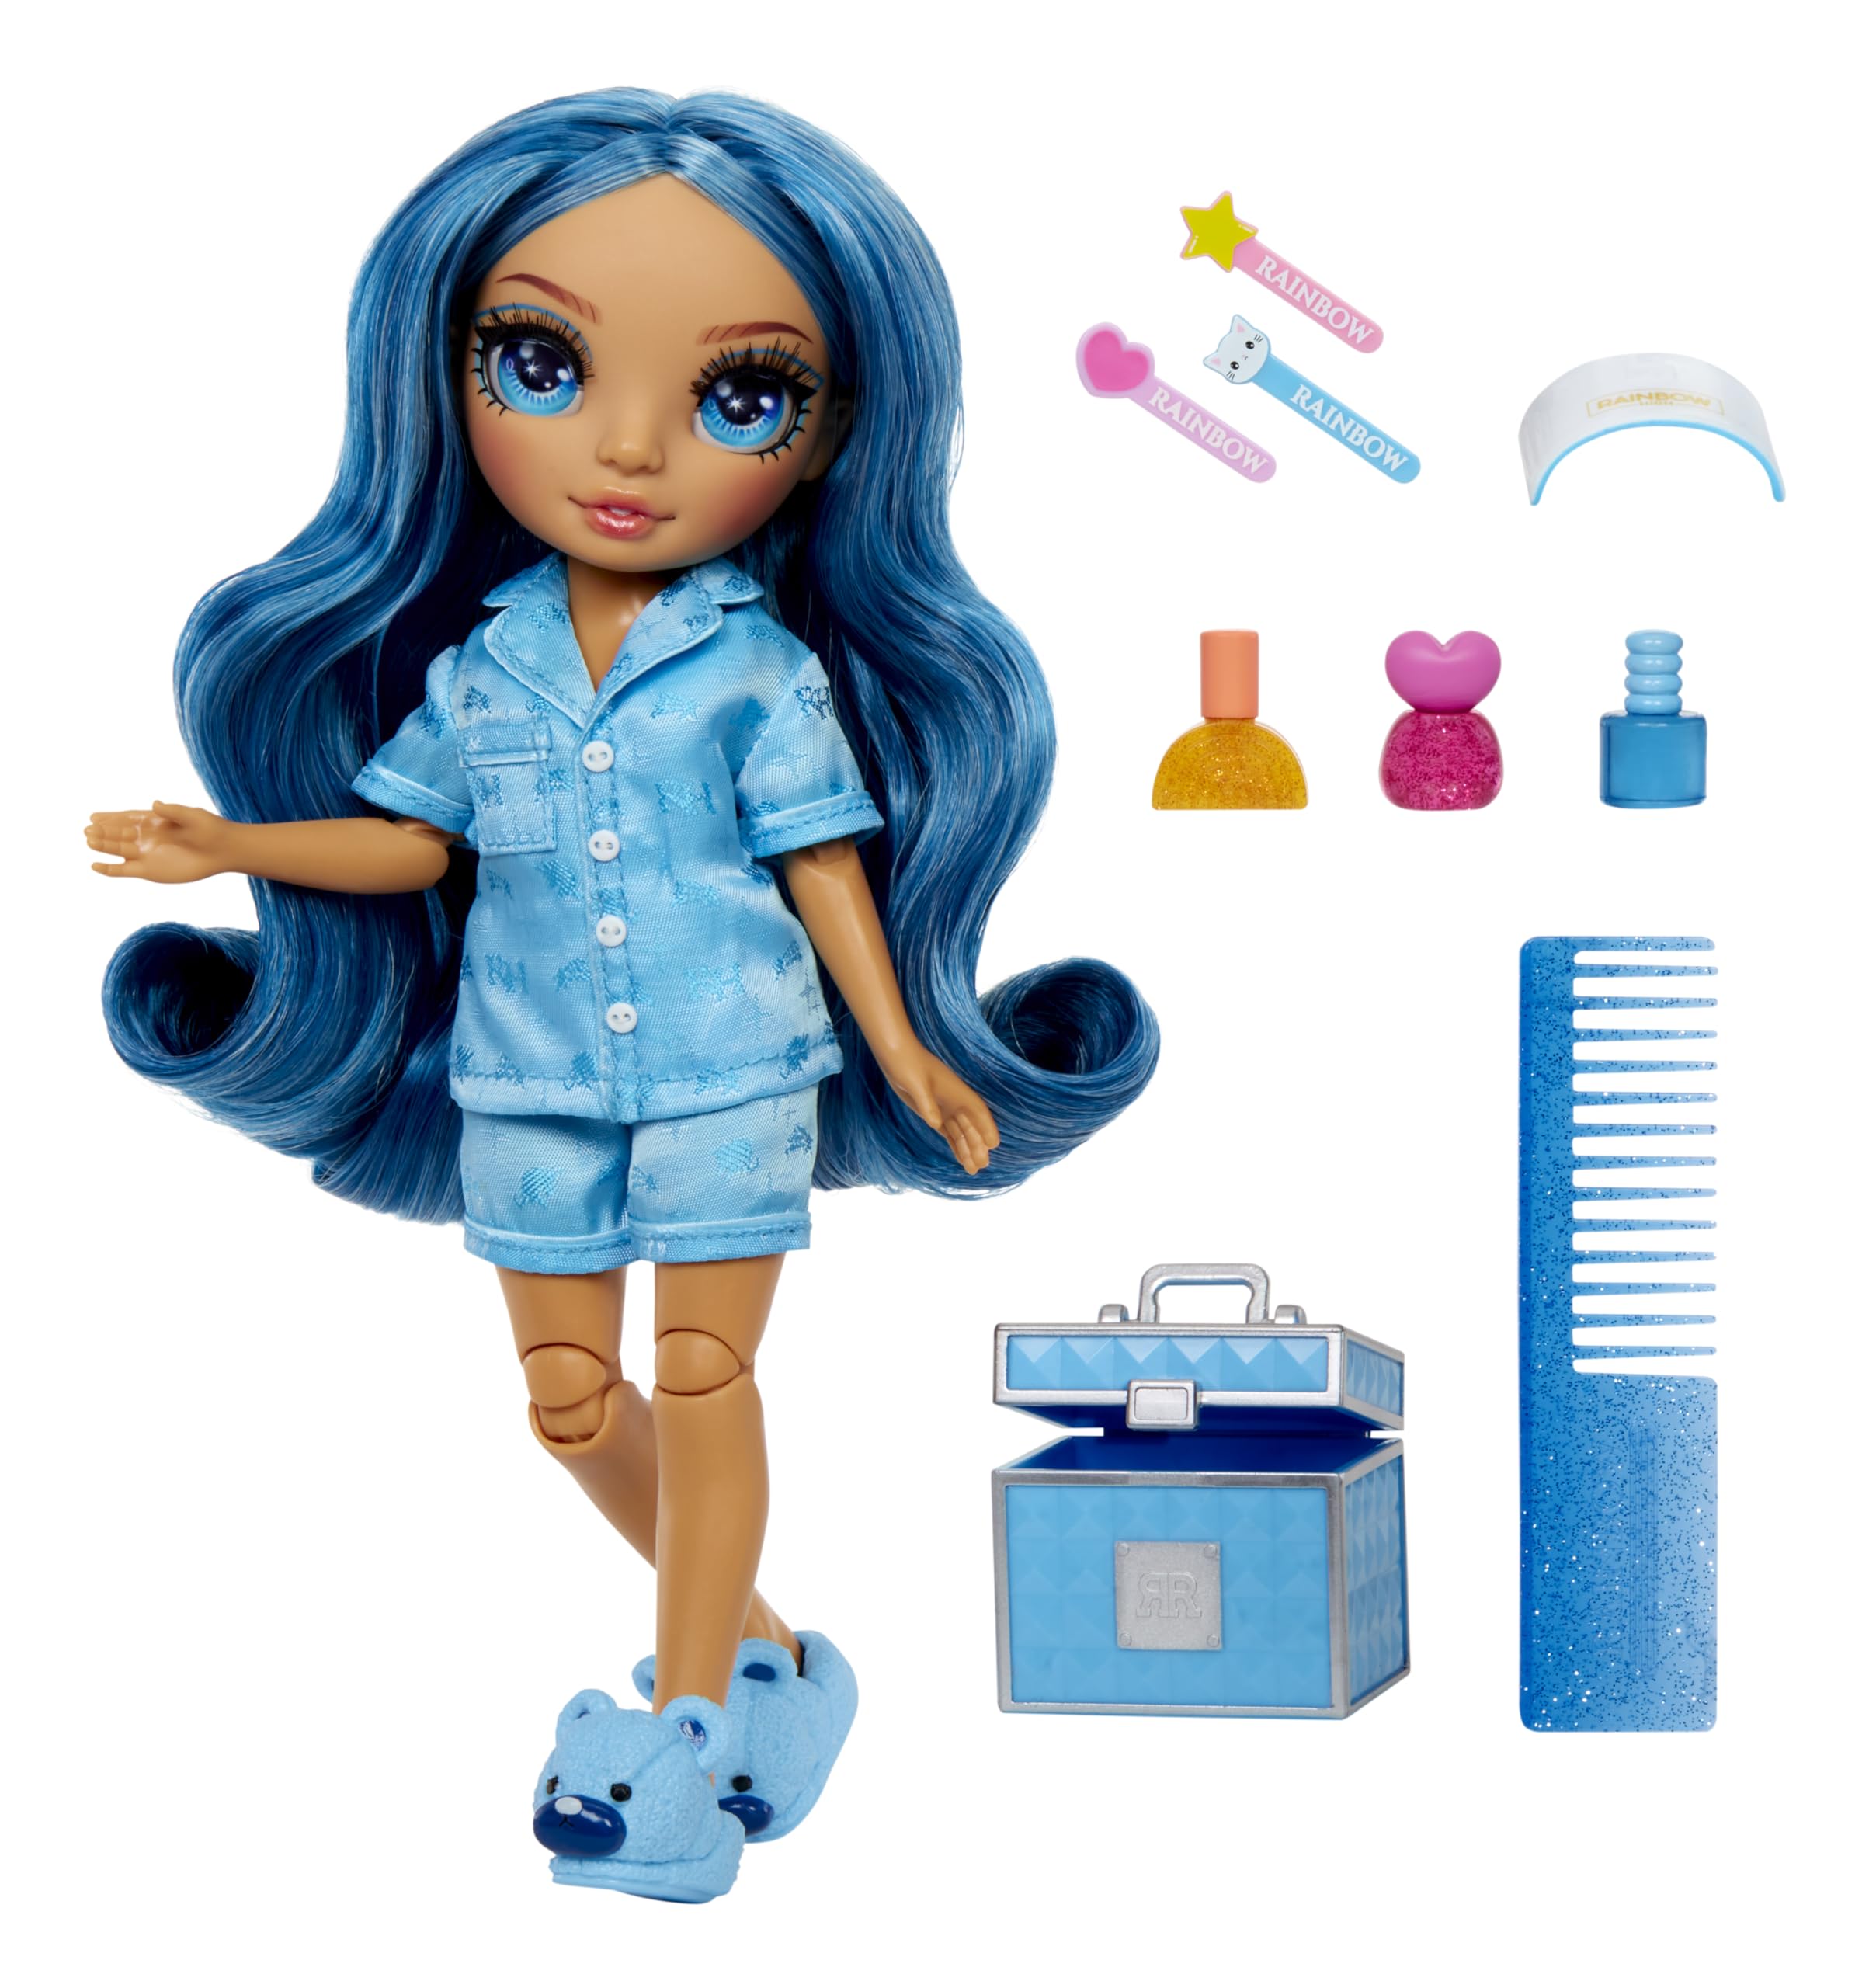 Rainbow High Jr High PJ Party-Skyler (Blue) 9” Posable Doll with Soft Onesie, Slippers, Play Accessories, Kids Toy Ages 4-12 Years